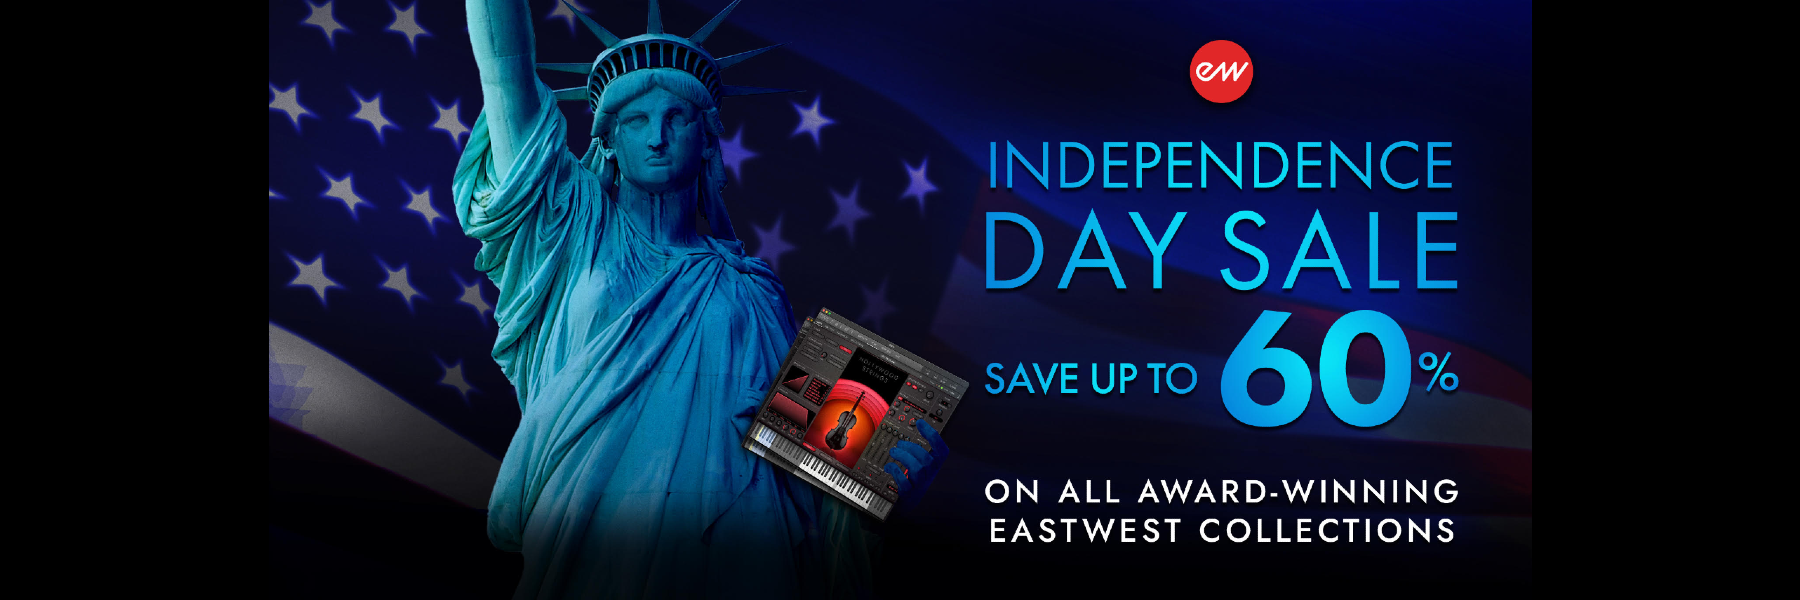 EastWest Independance Day Sale | Save up to 60%